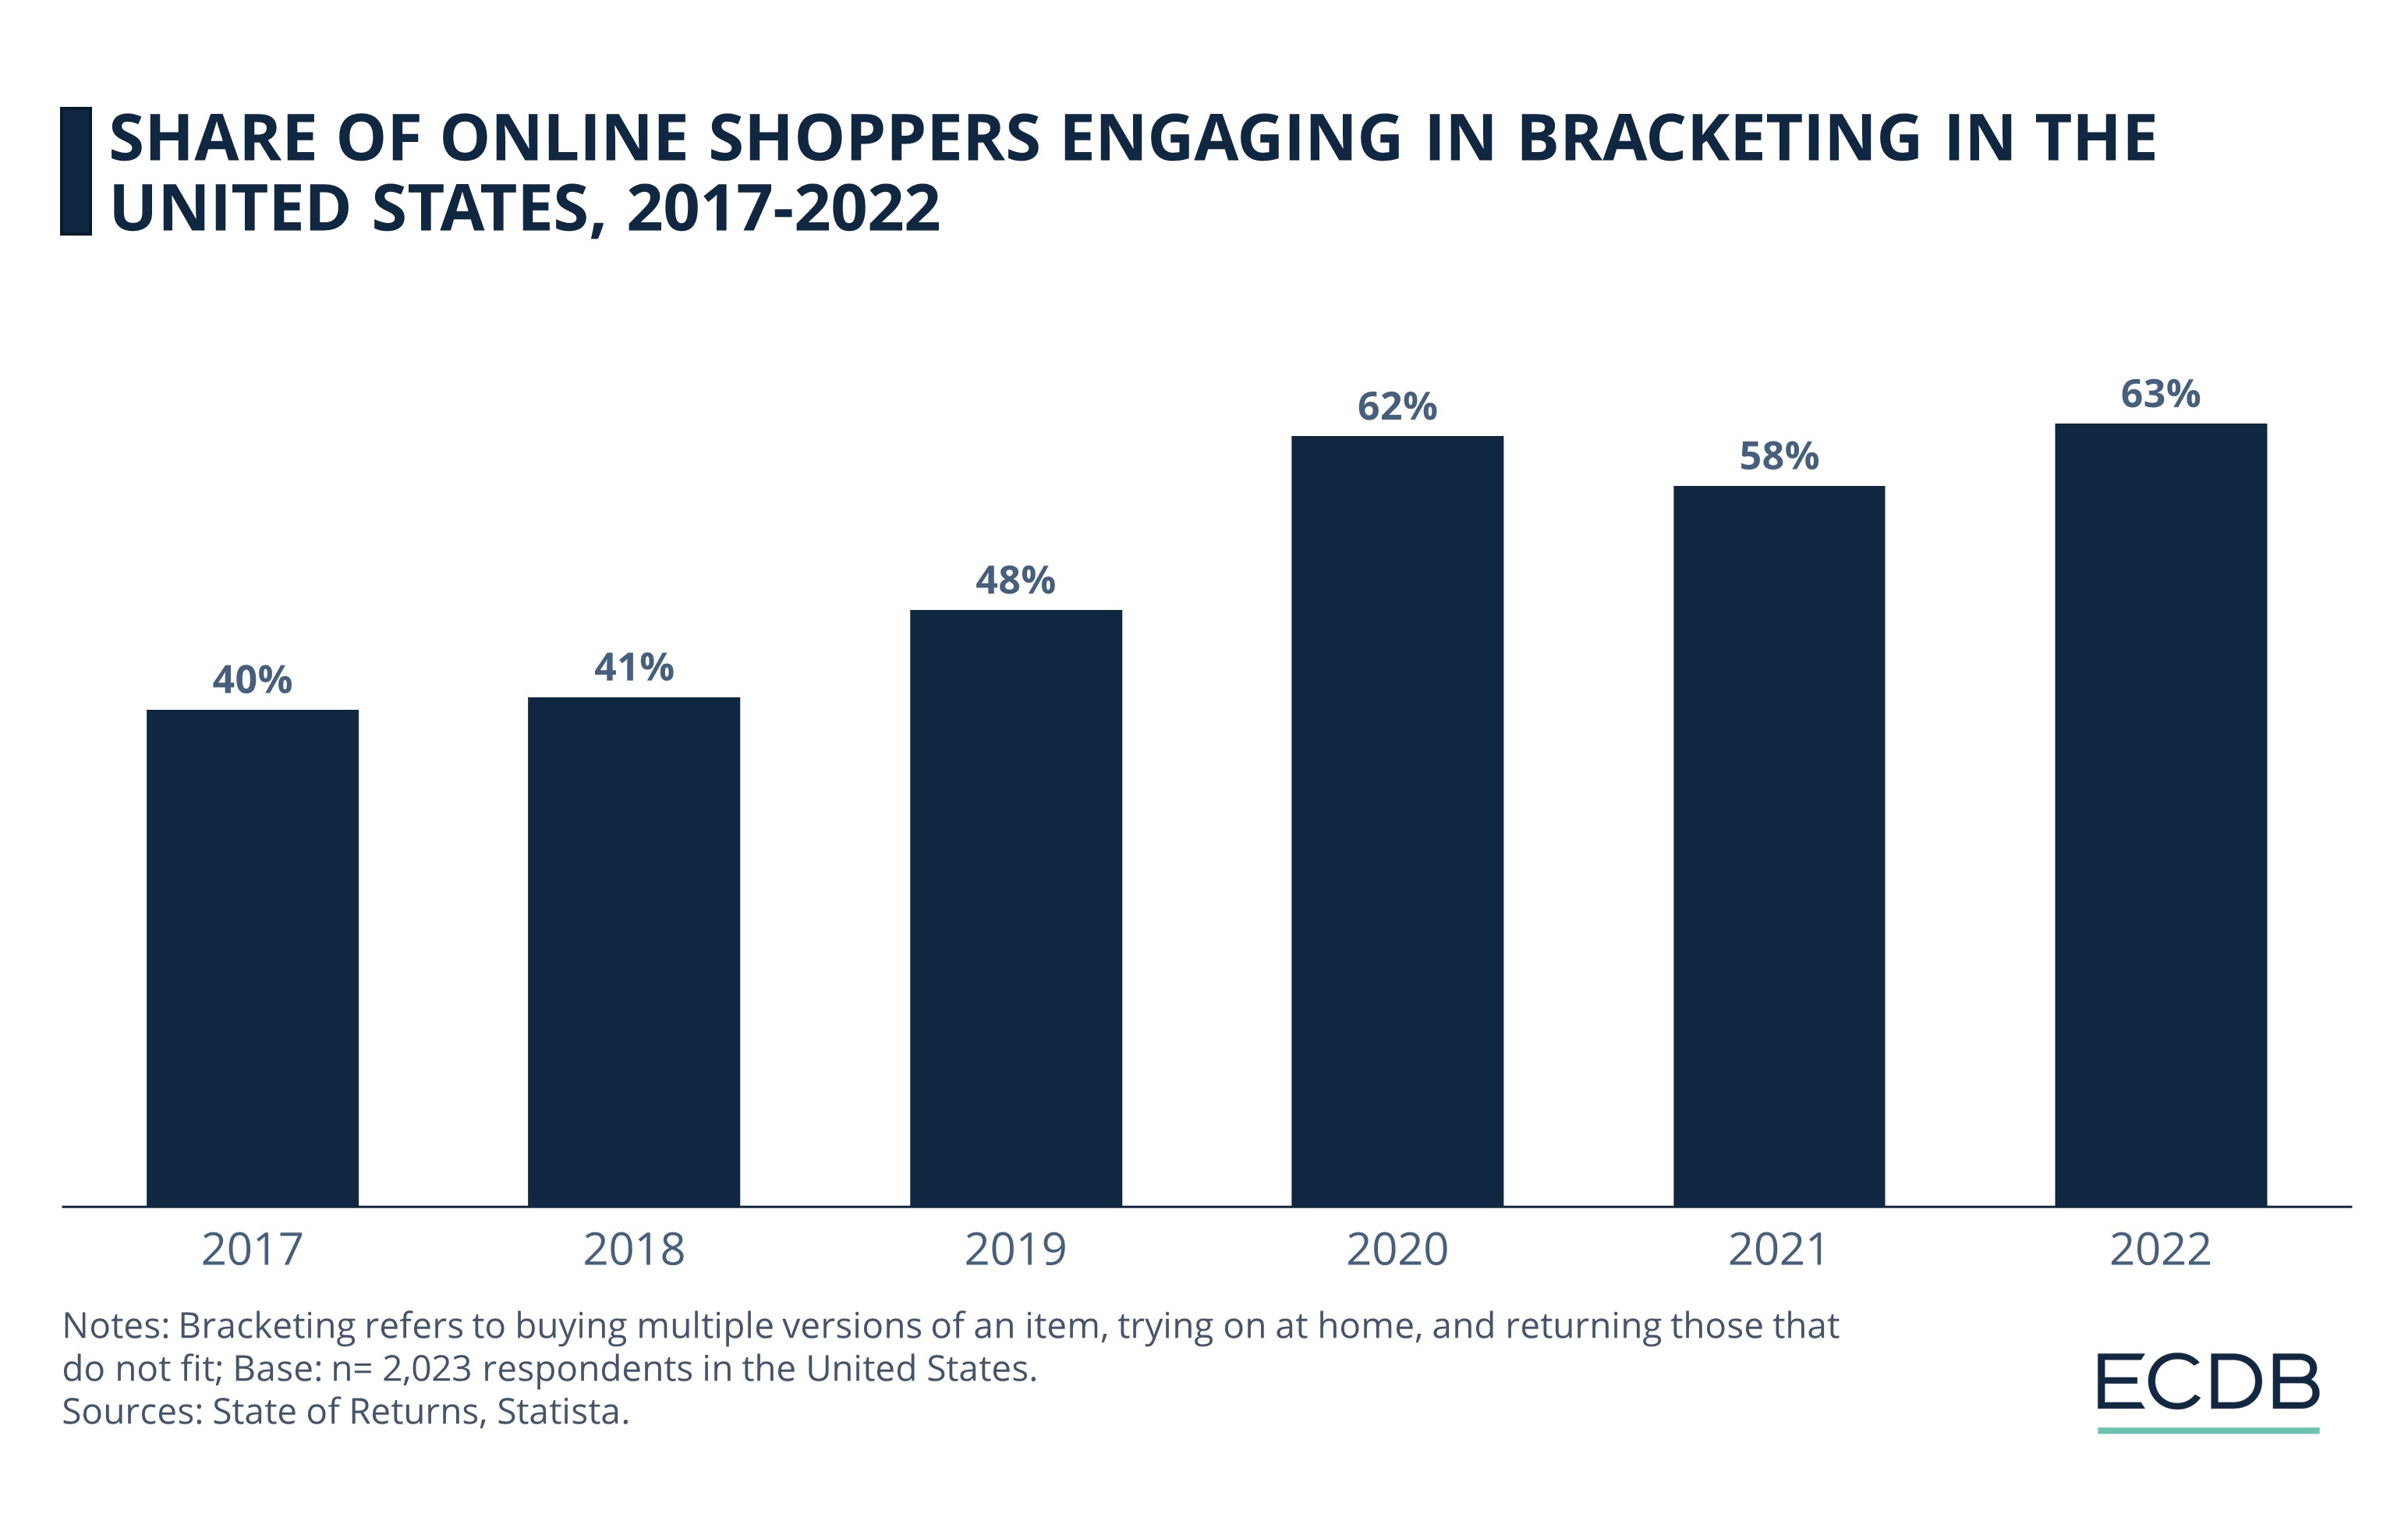 Share of Online Shoppers Engaging in Bracketing in the United States, 2017-2022